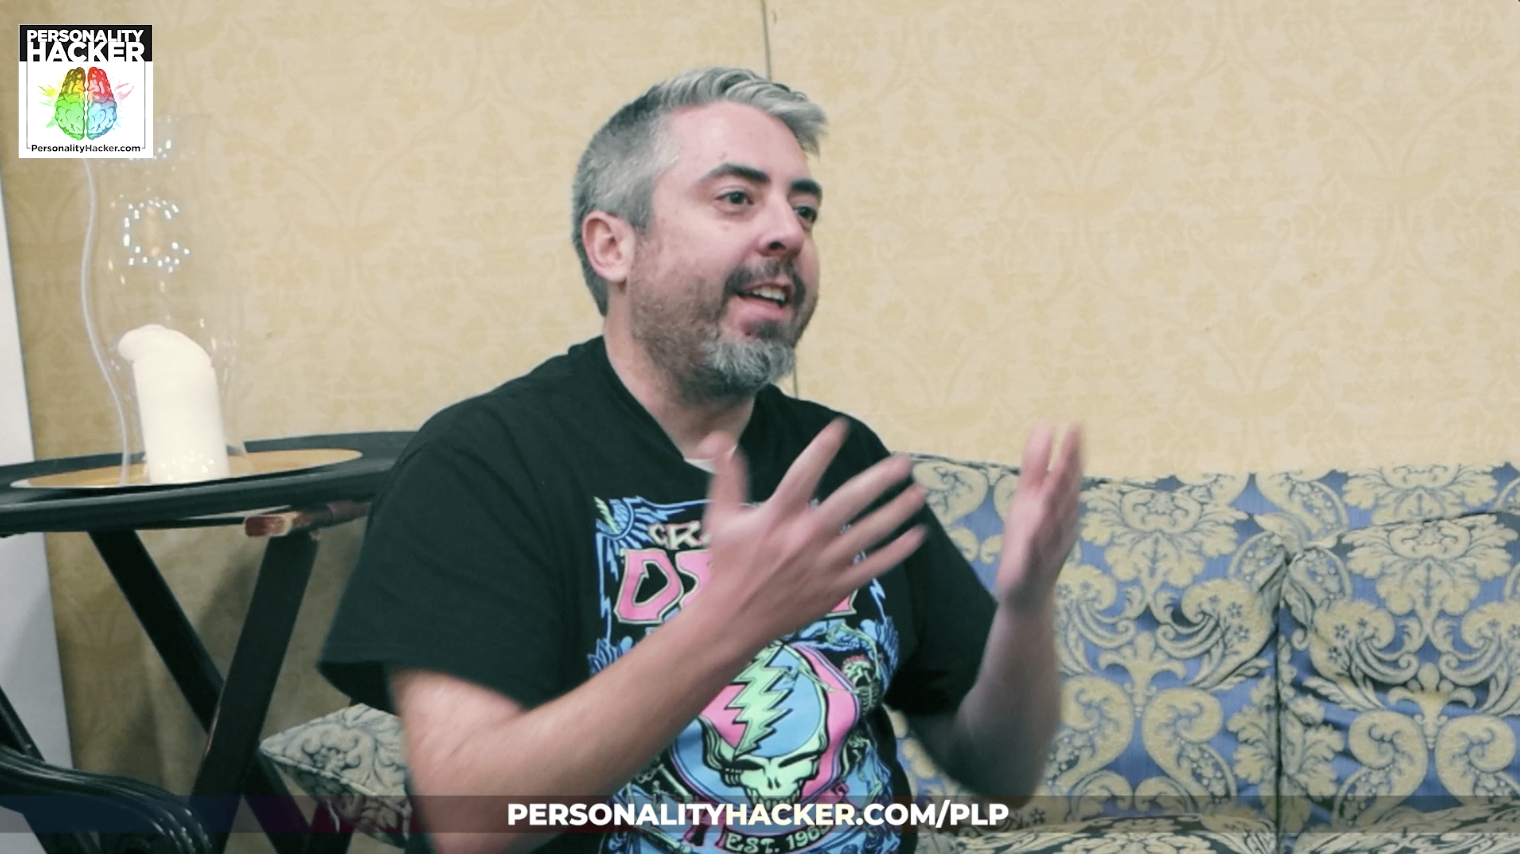 [VIDEO] Shaun Reflects On The "Personality Life Path" Mentorship